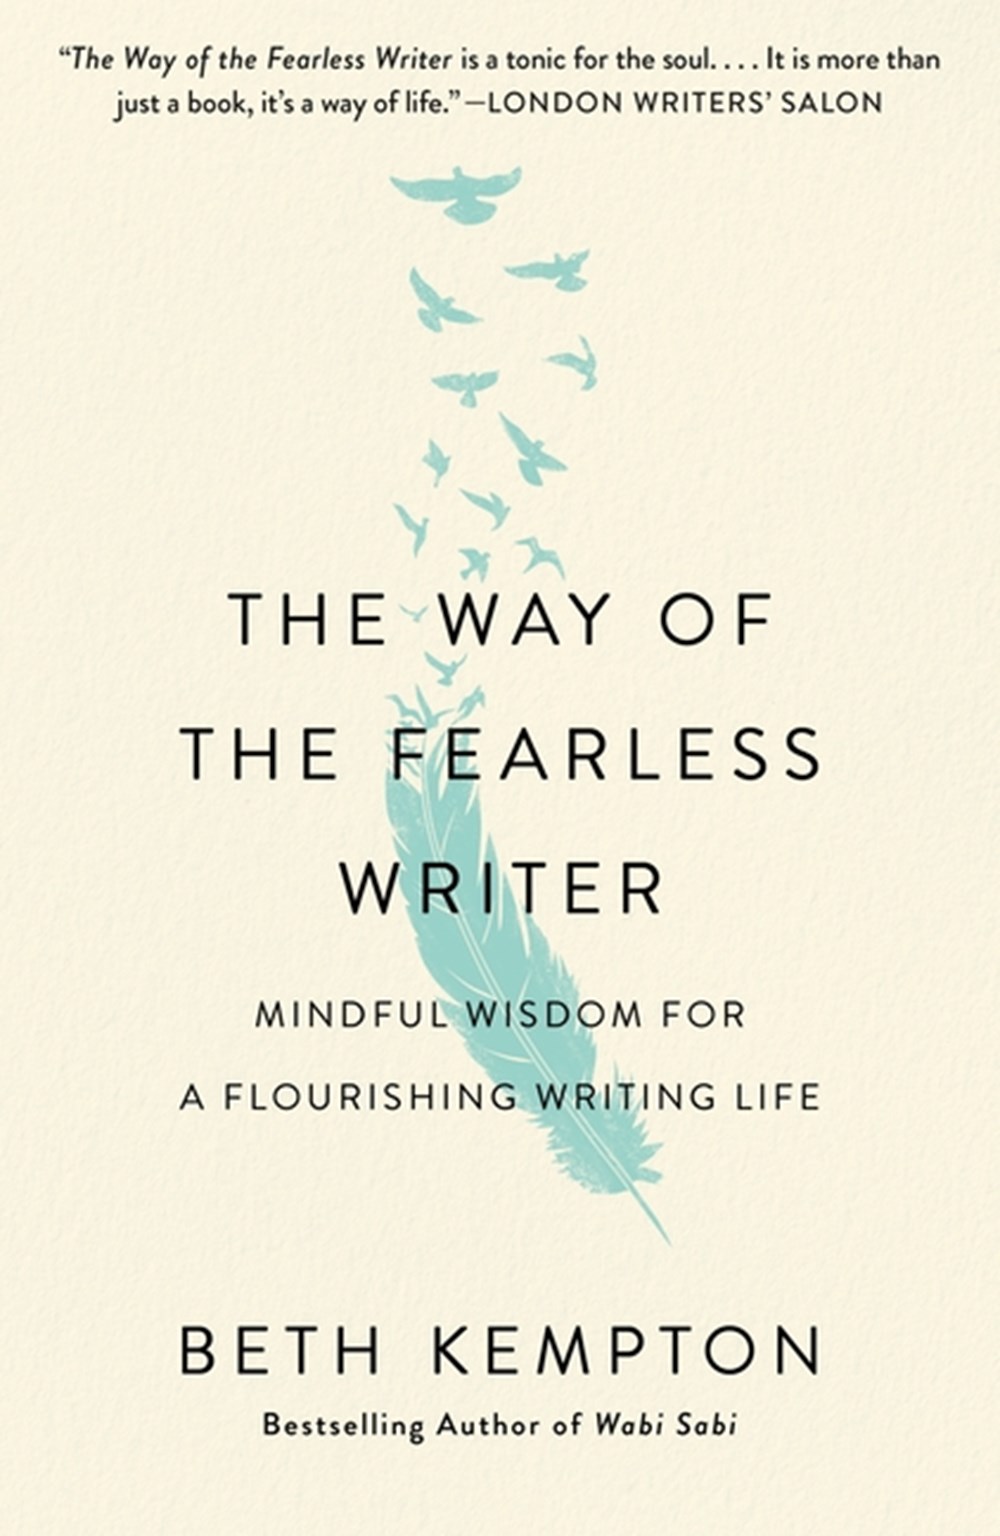 Way of the Fearless Writer: Mindful Wisdom for a Flourishing Writing Life